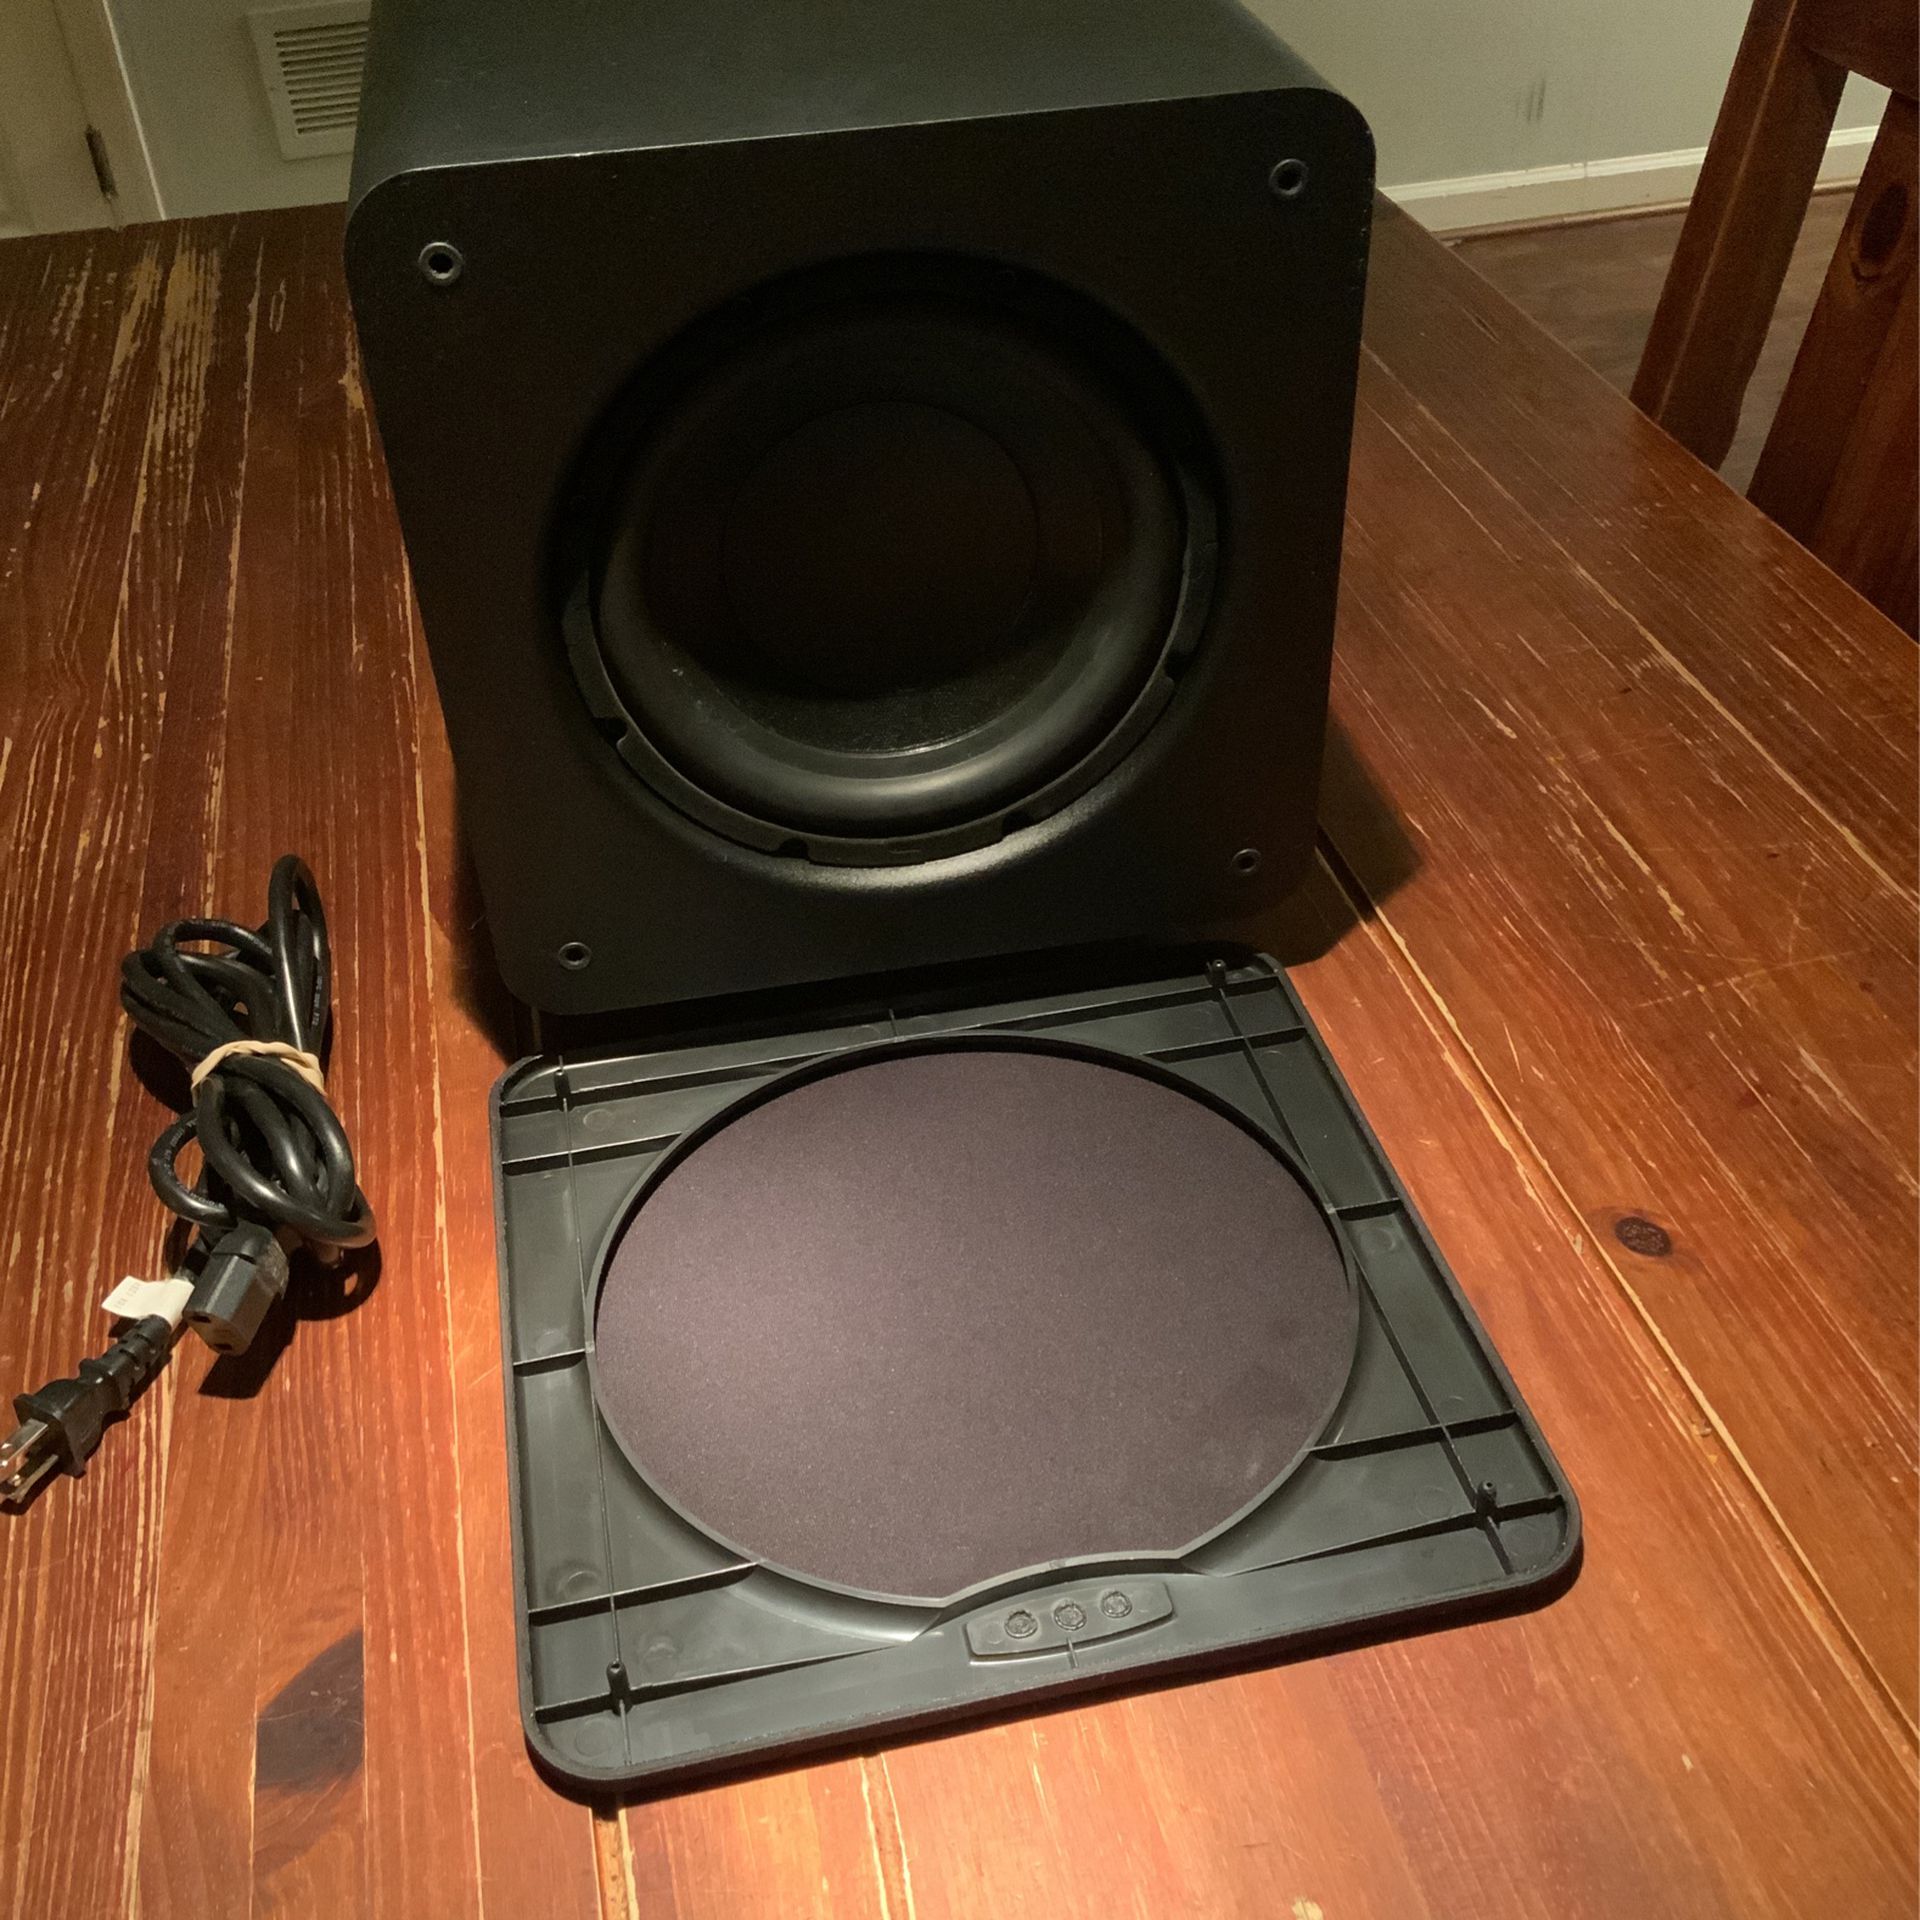 Polk Audio PSW111 8" Powered Subwoofer - Power Port Technology | Up to 300 Watt Amp | Big Bass in Compact Size | Easy Setup with Home Theater Systems 